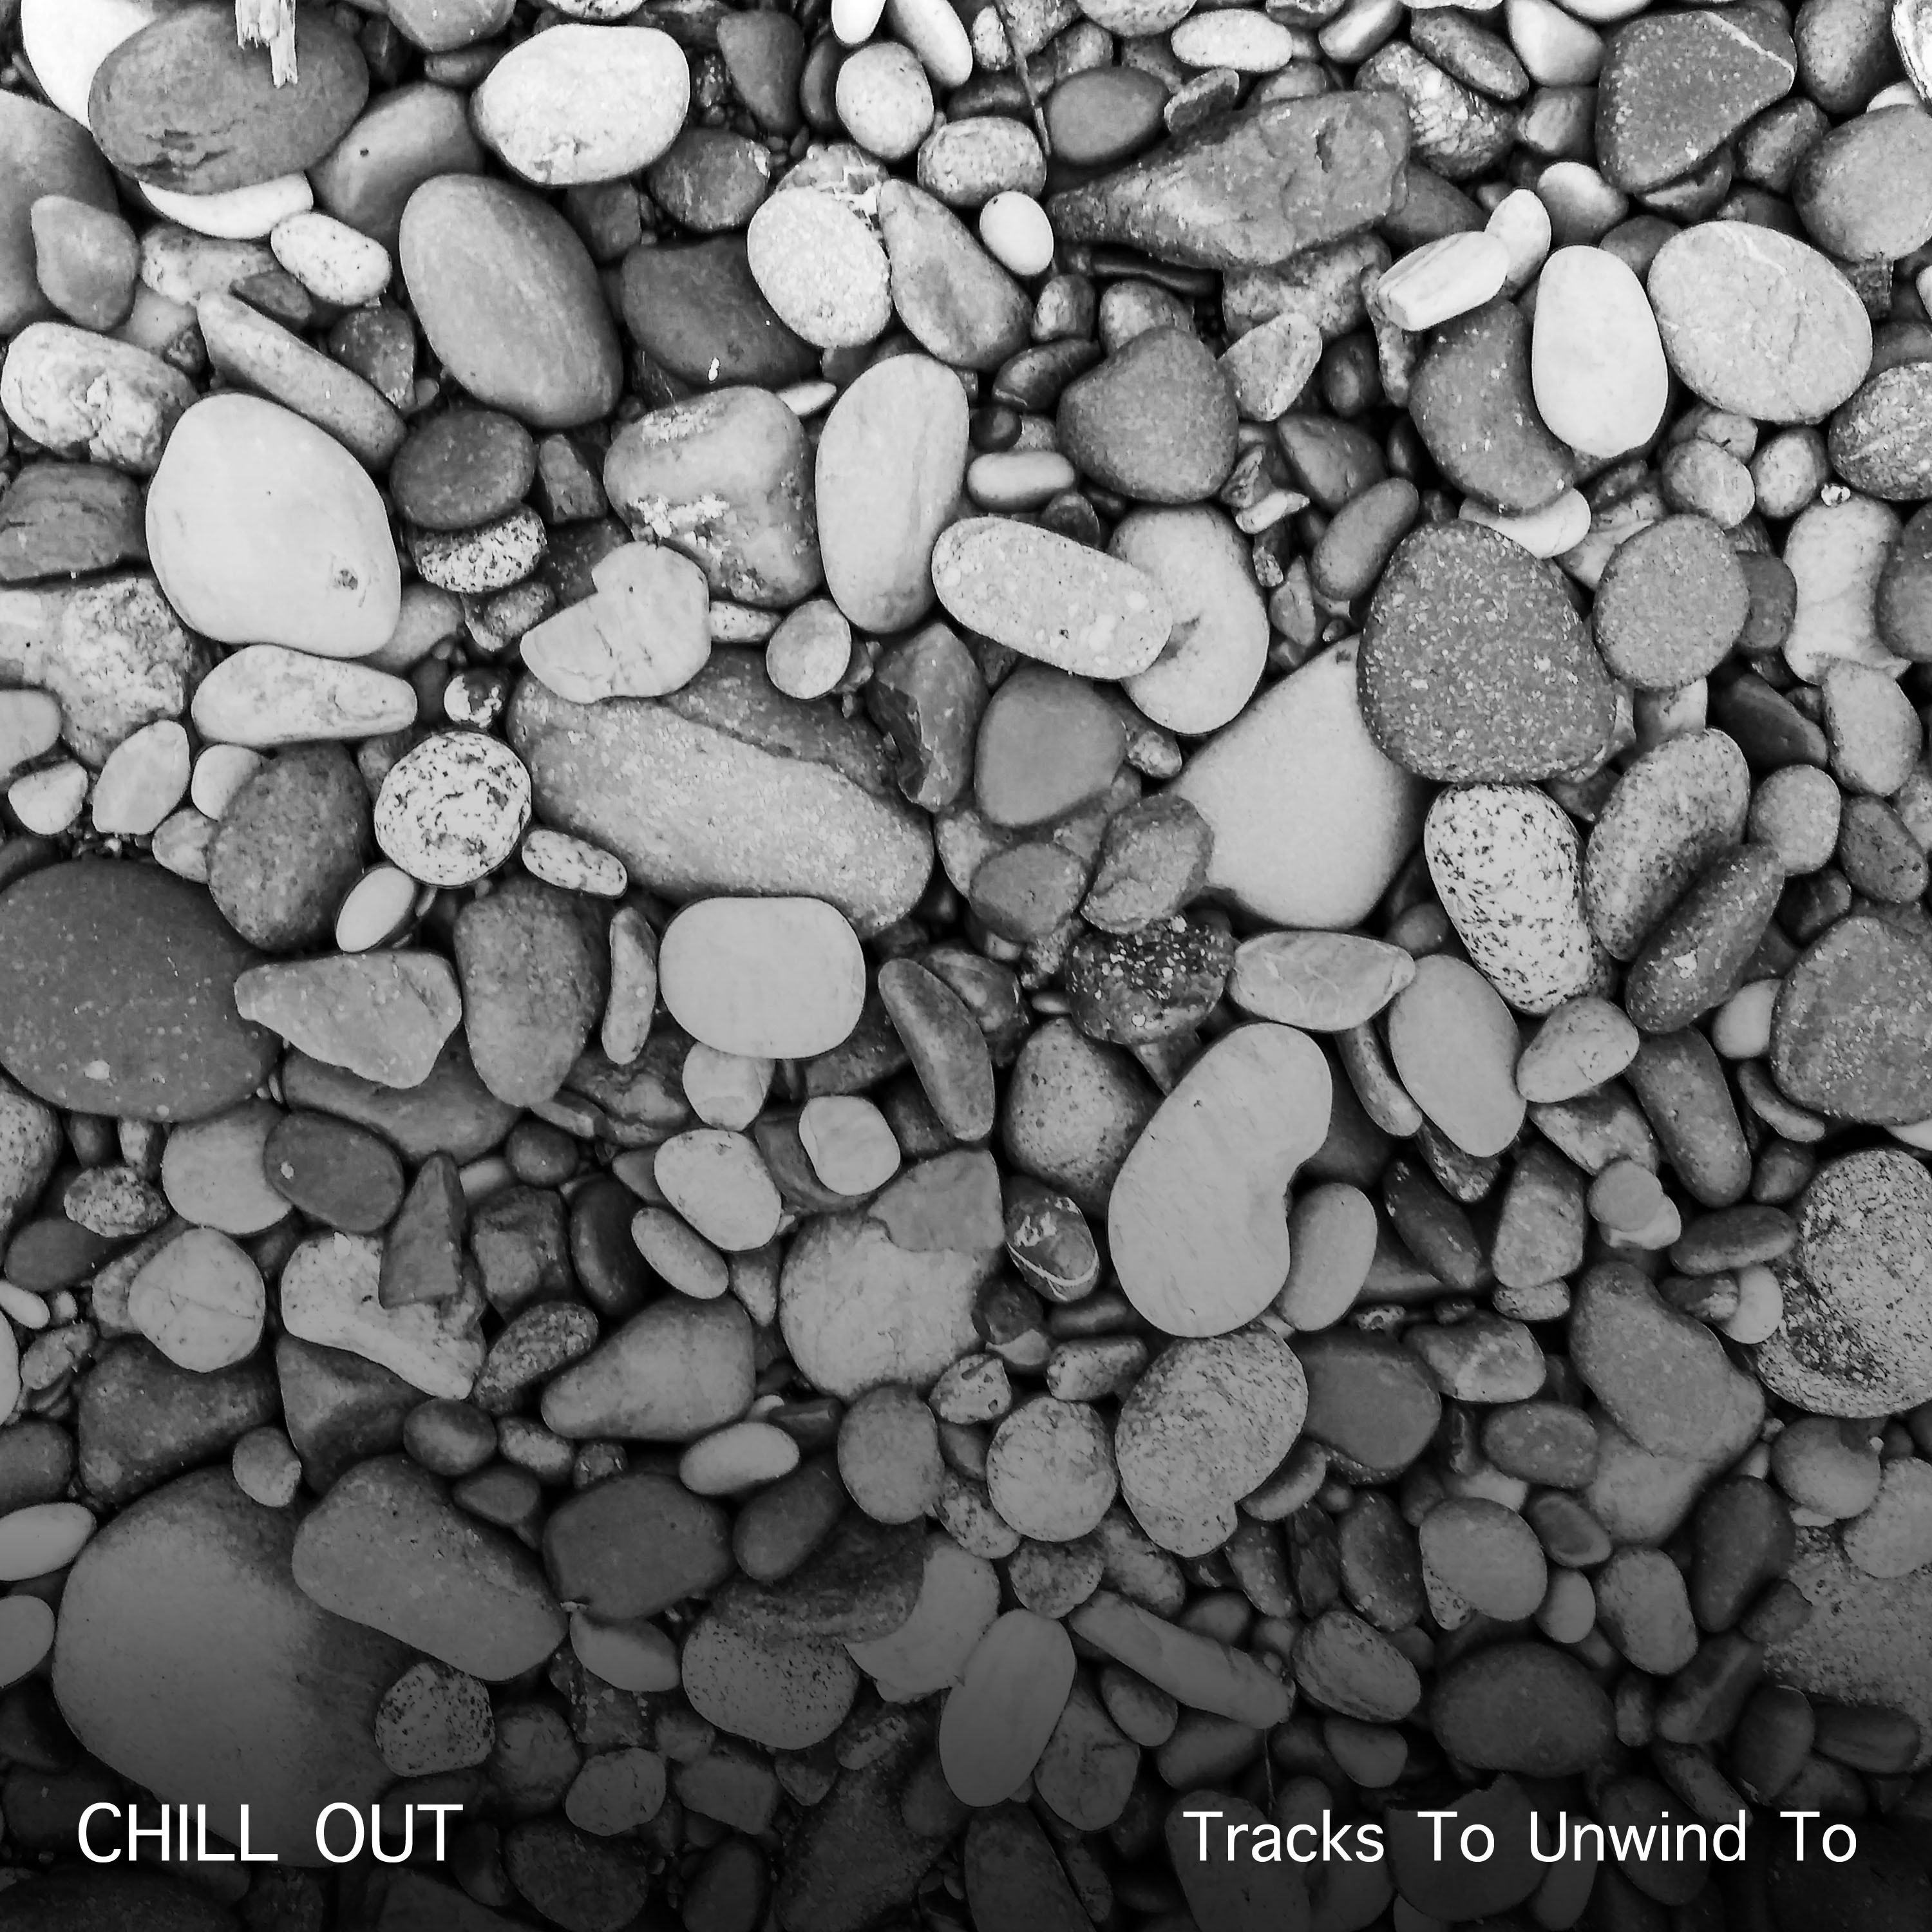 12 Tracks to Unwind and Chill Out